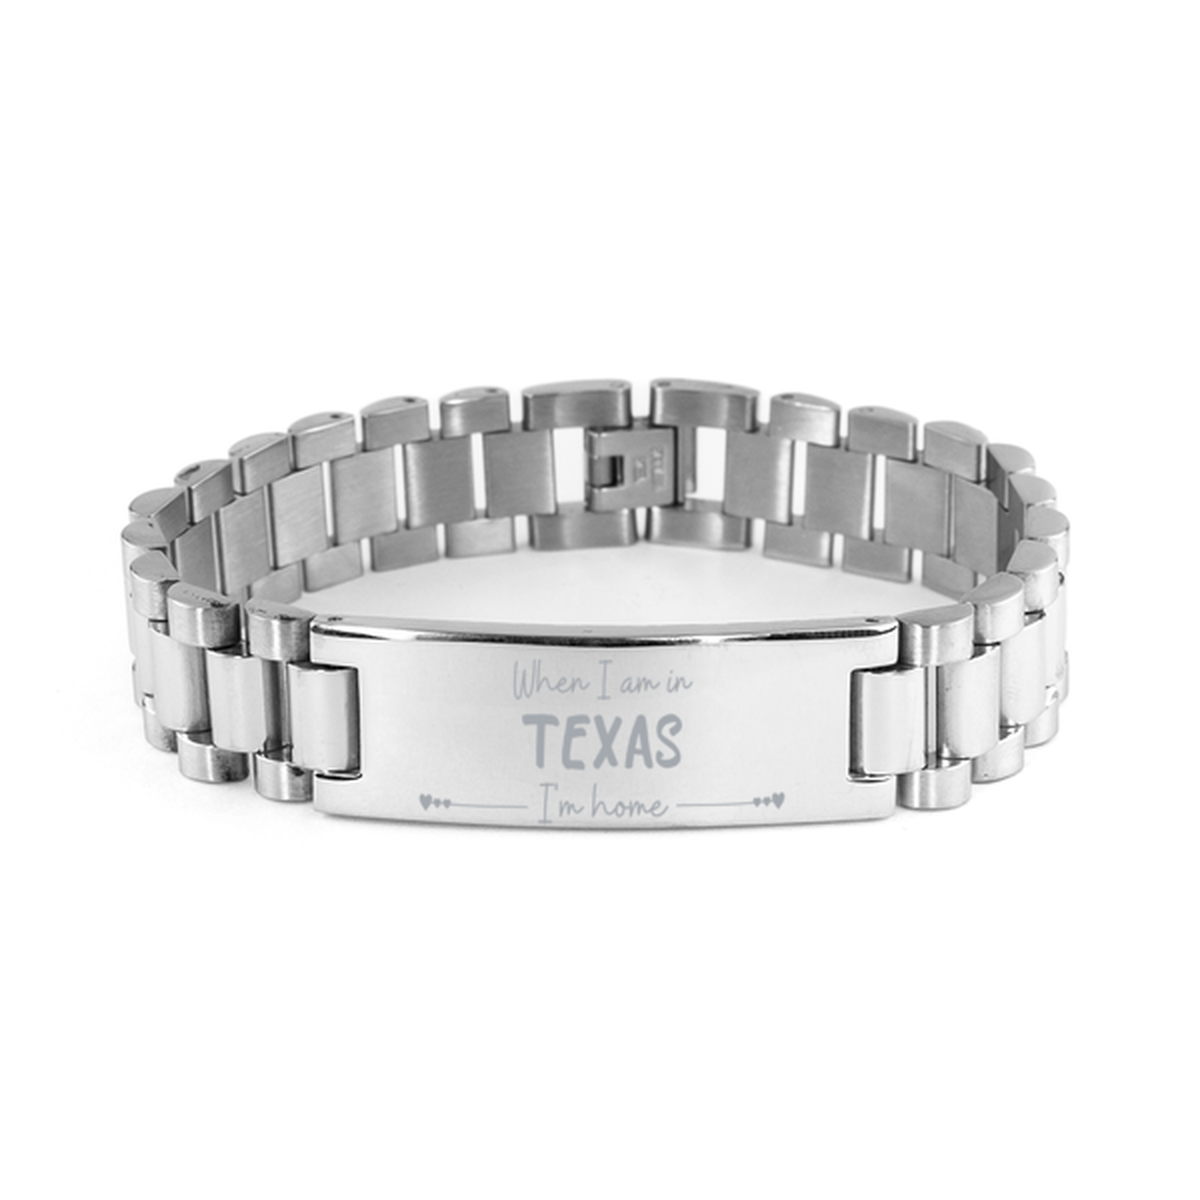 When I am in Texas I'm home Ladder Stainless Steel Bracelet, Cheap Gifts For Texas, State Texas Birthday Gifts for Friends Coworker